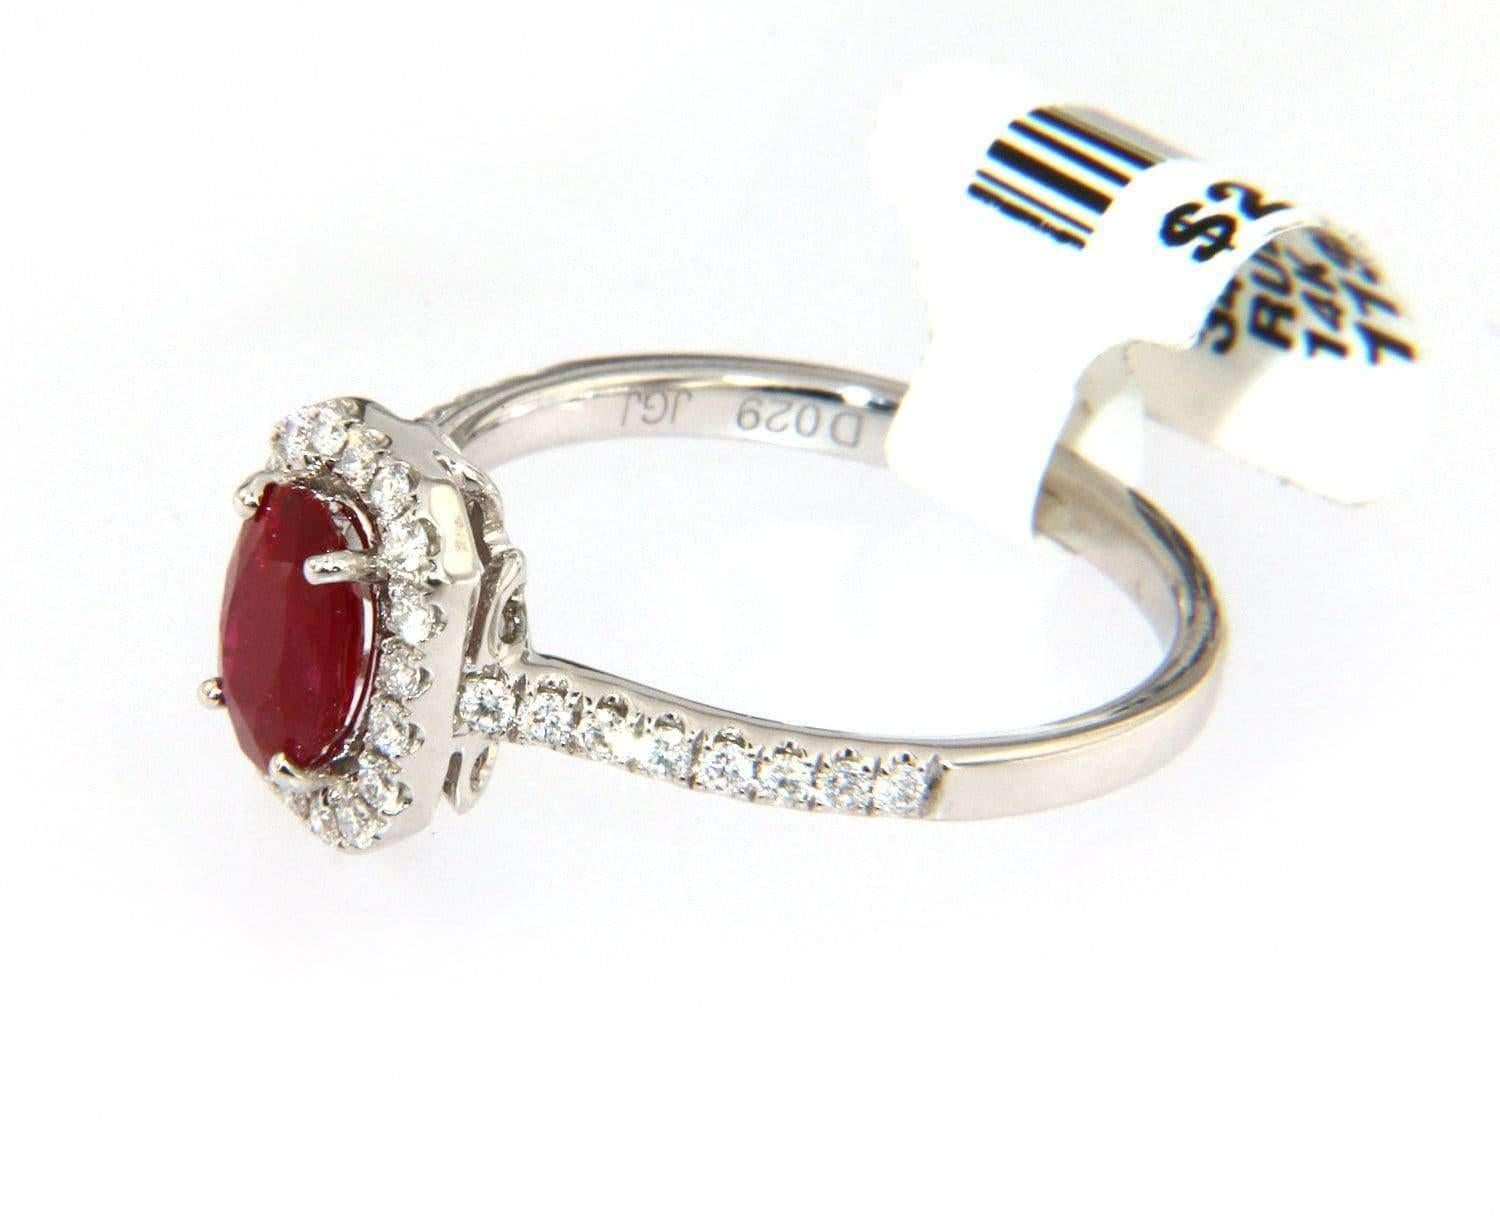 New 0.94 CT Ruby Ring with Diamond Halo in 14K

Ruby & Diamond Ring
14K White Gold
Ruby Weight: approx. 0.94 Ct
Diamond Weight: approx. 0.29 CTW
Ring Size: 6.75 (US)
Weight: approx. 2.9 Grams
Stamped: 14K, 585

Condition:
Offered for your